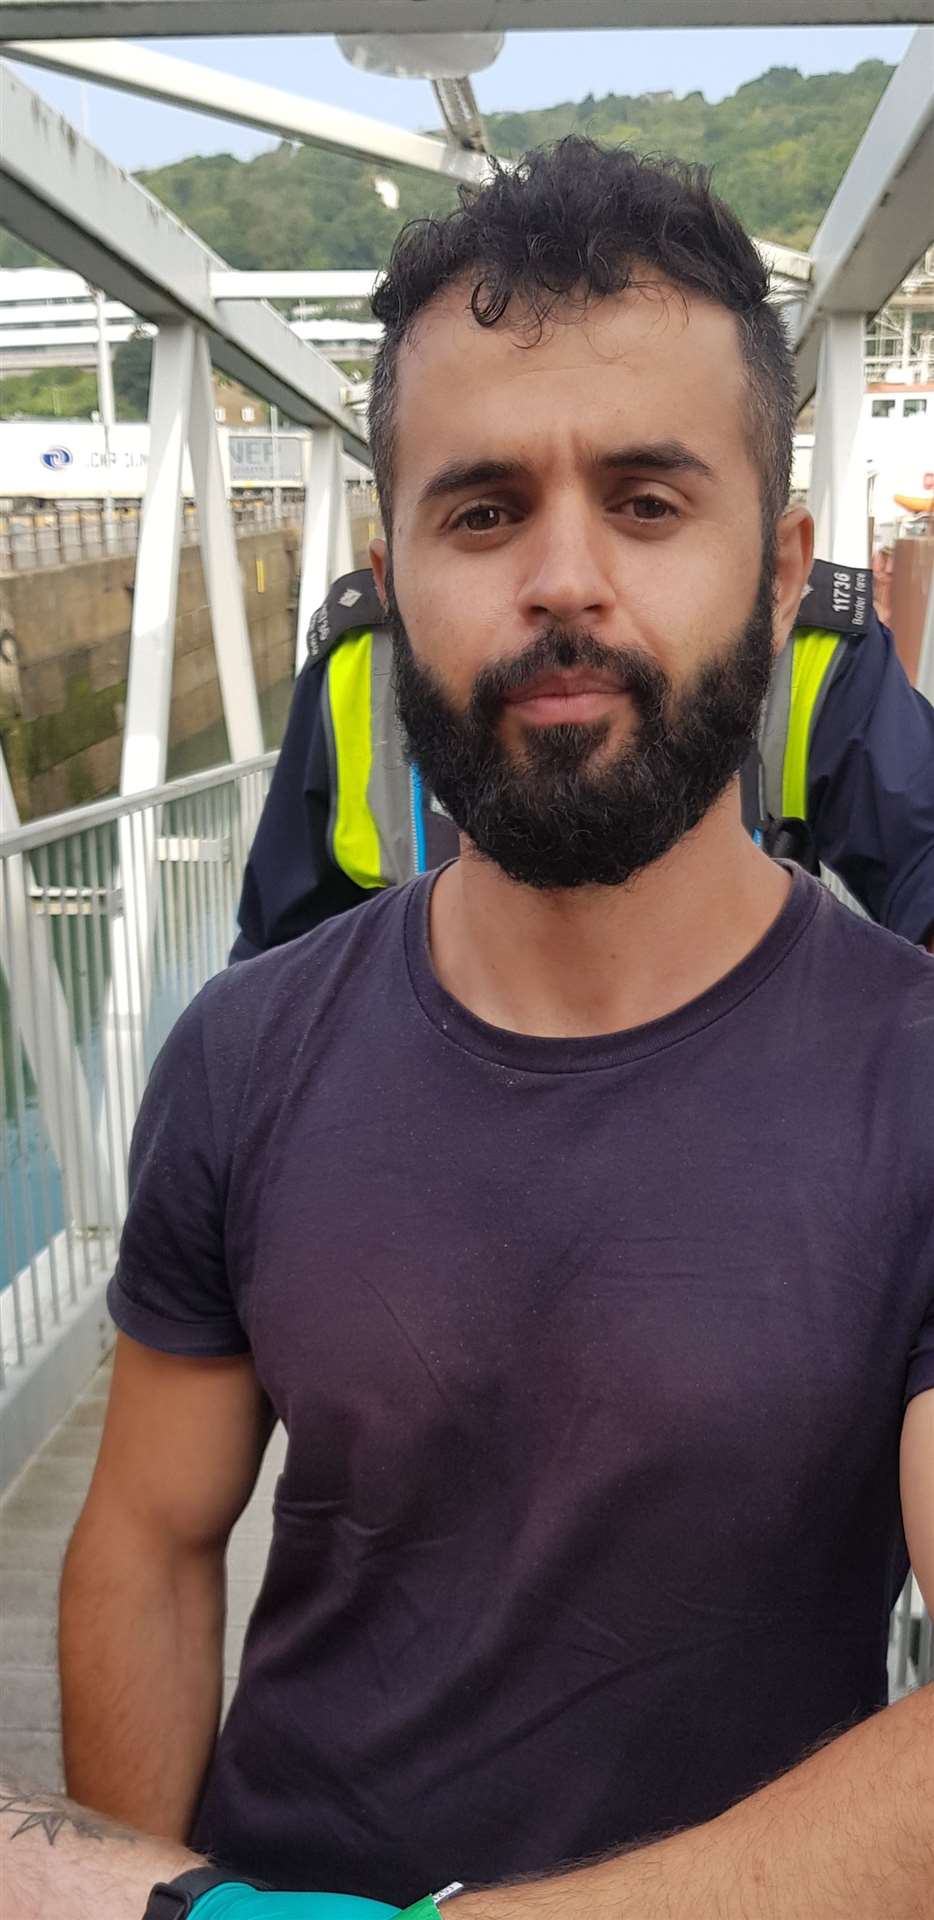 Fouad Kakaei, 30, a migrant fleeing persecution in Iran, disembarking at Dover (Home OFfice/PA)